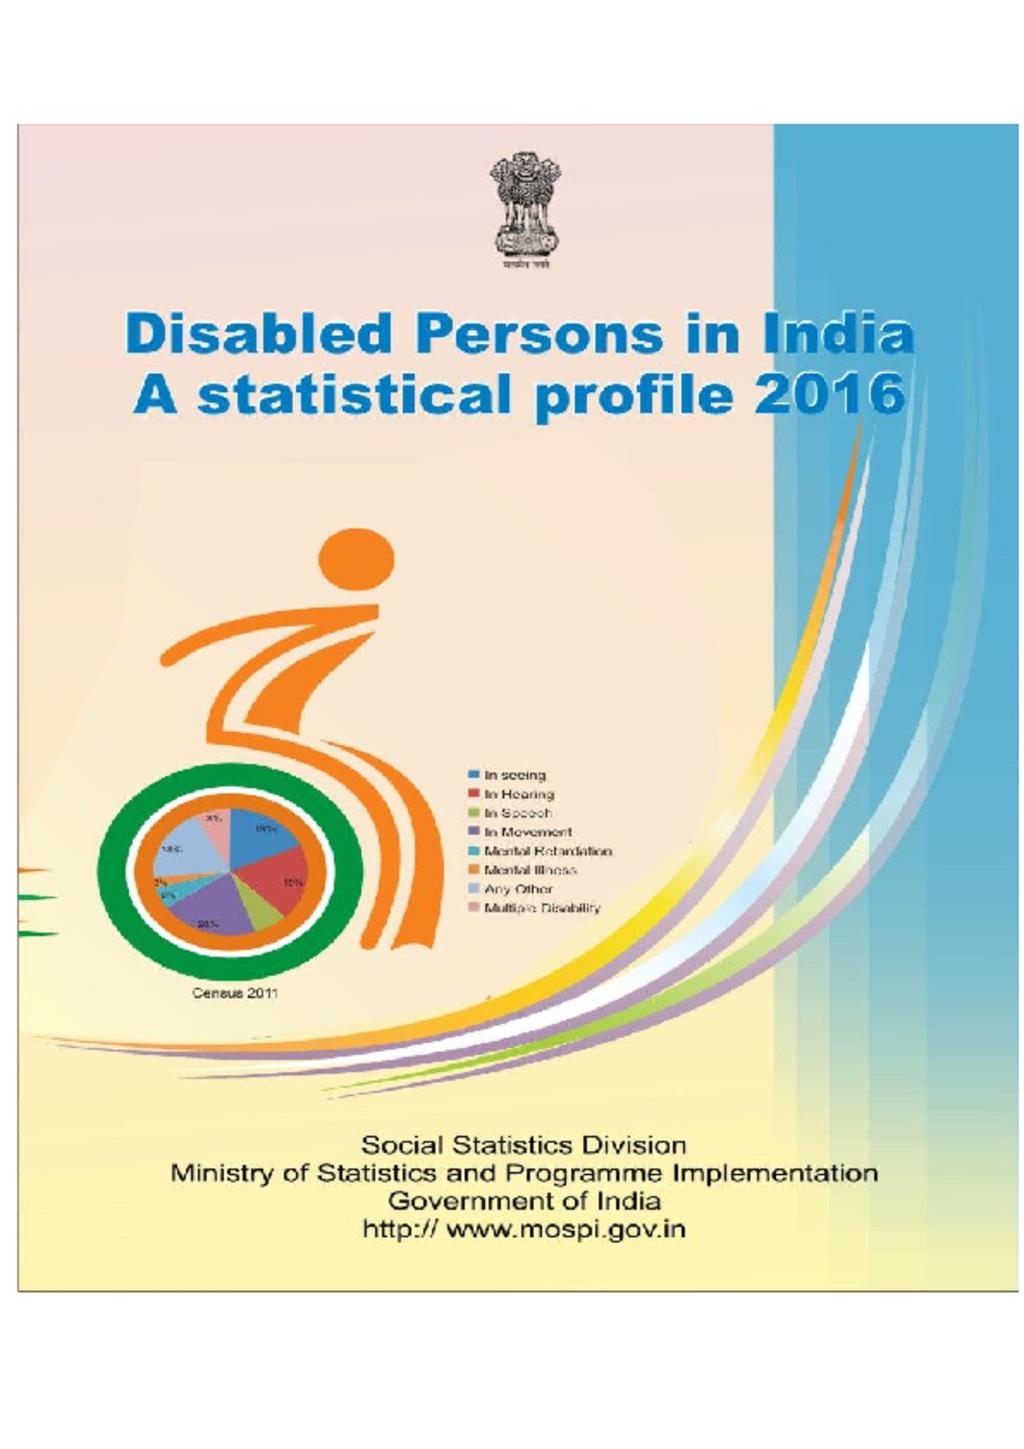 Disabled persons in India